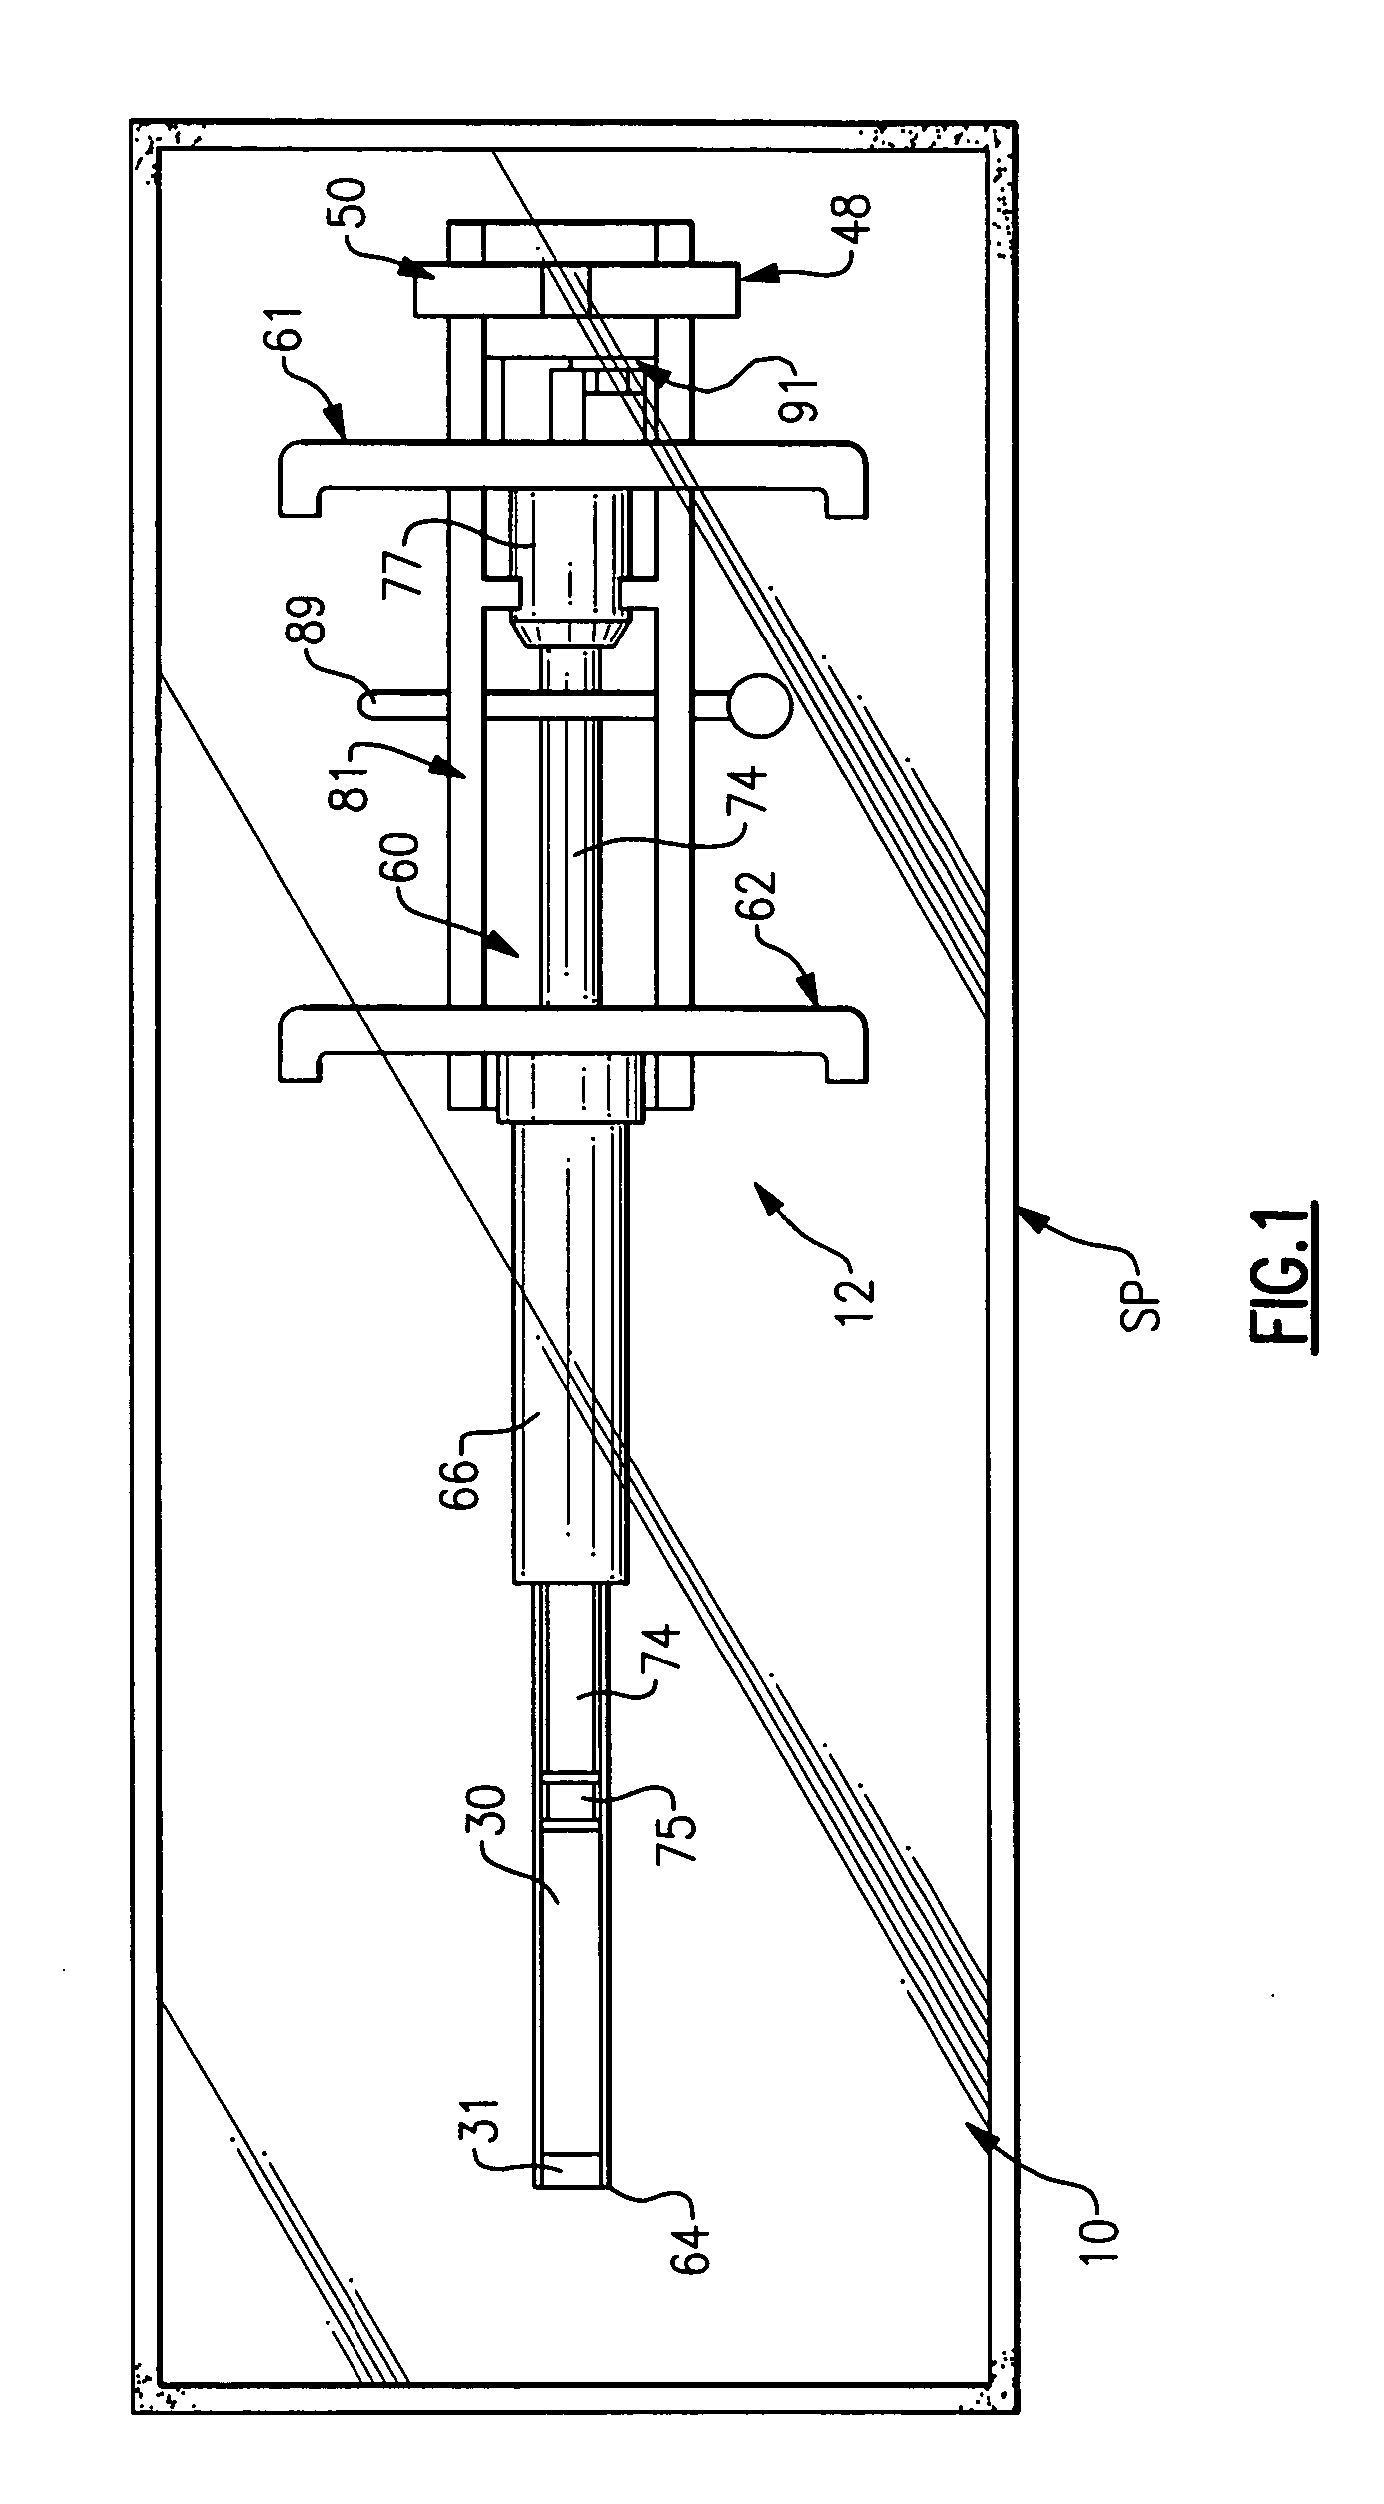 Percutaneous puncture sealing system